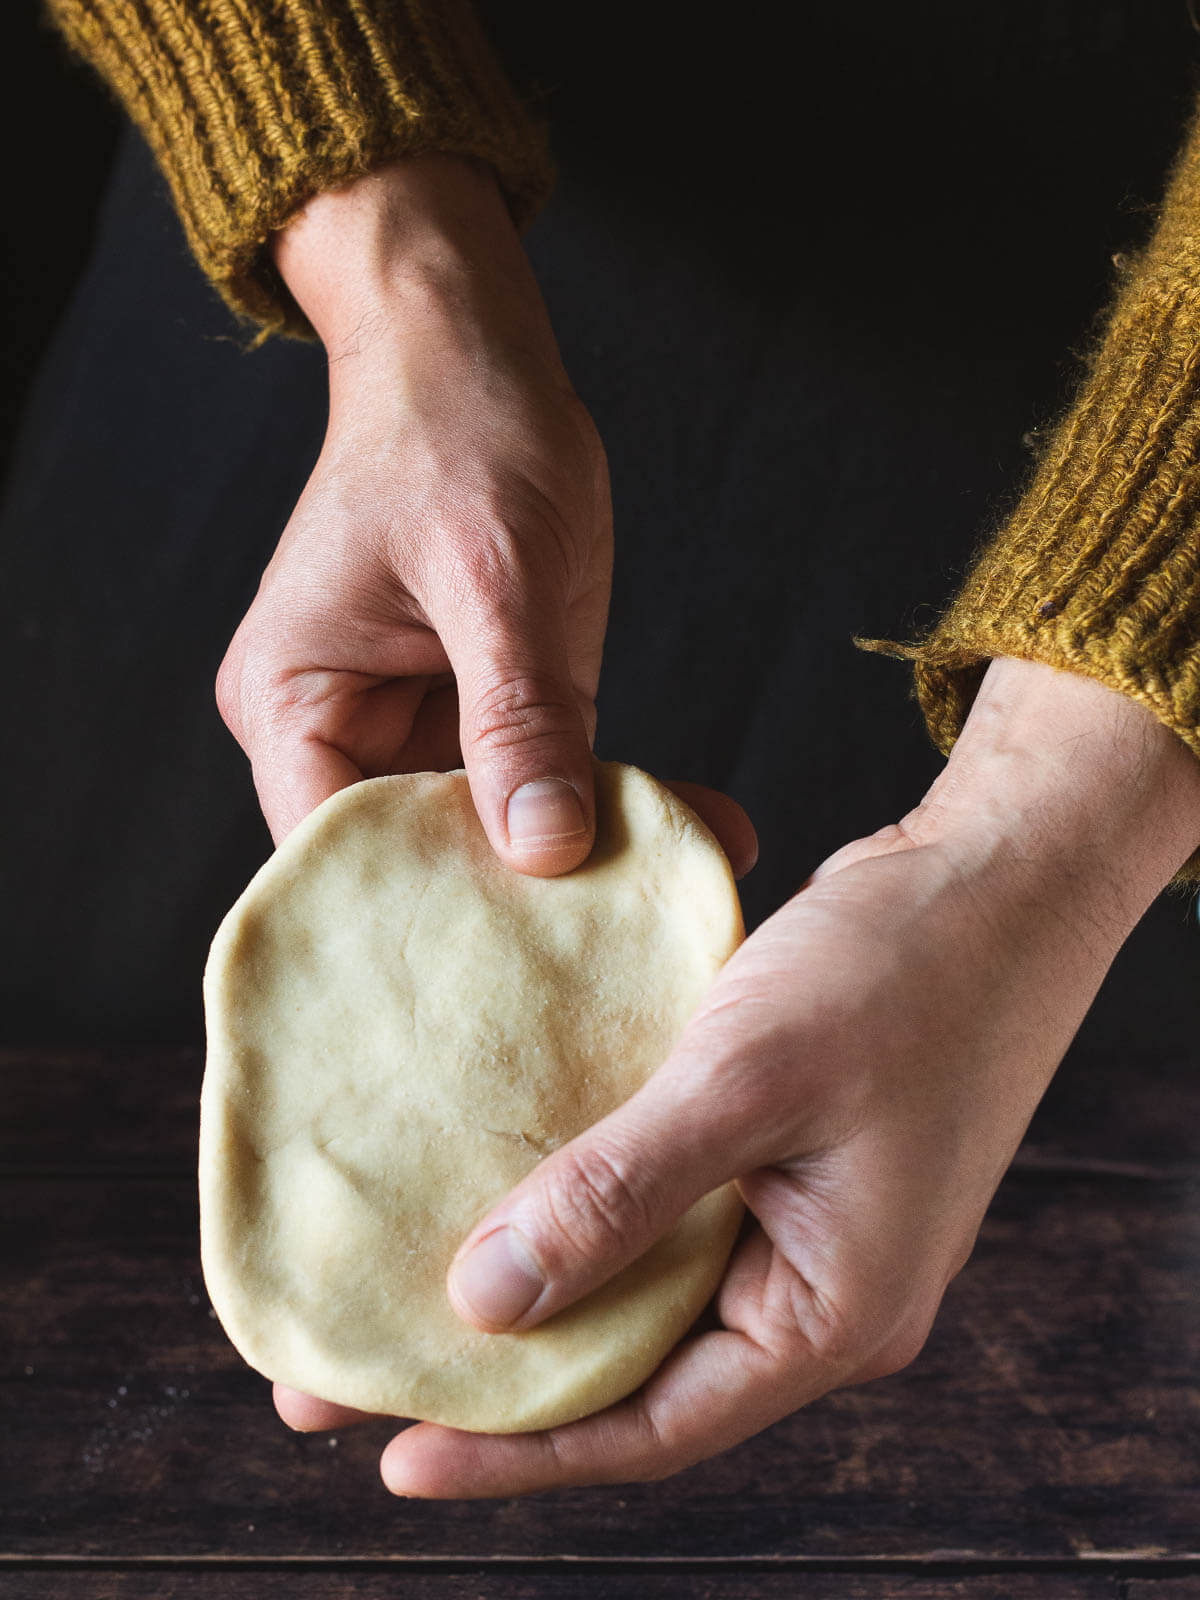 stretch the dough with your hands